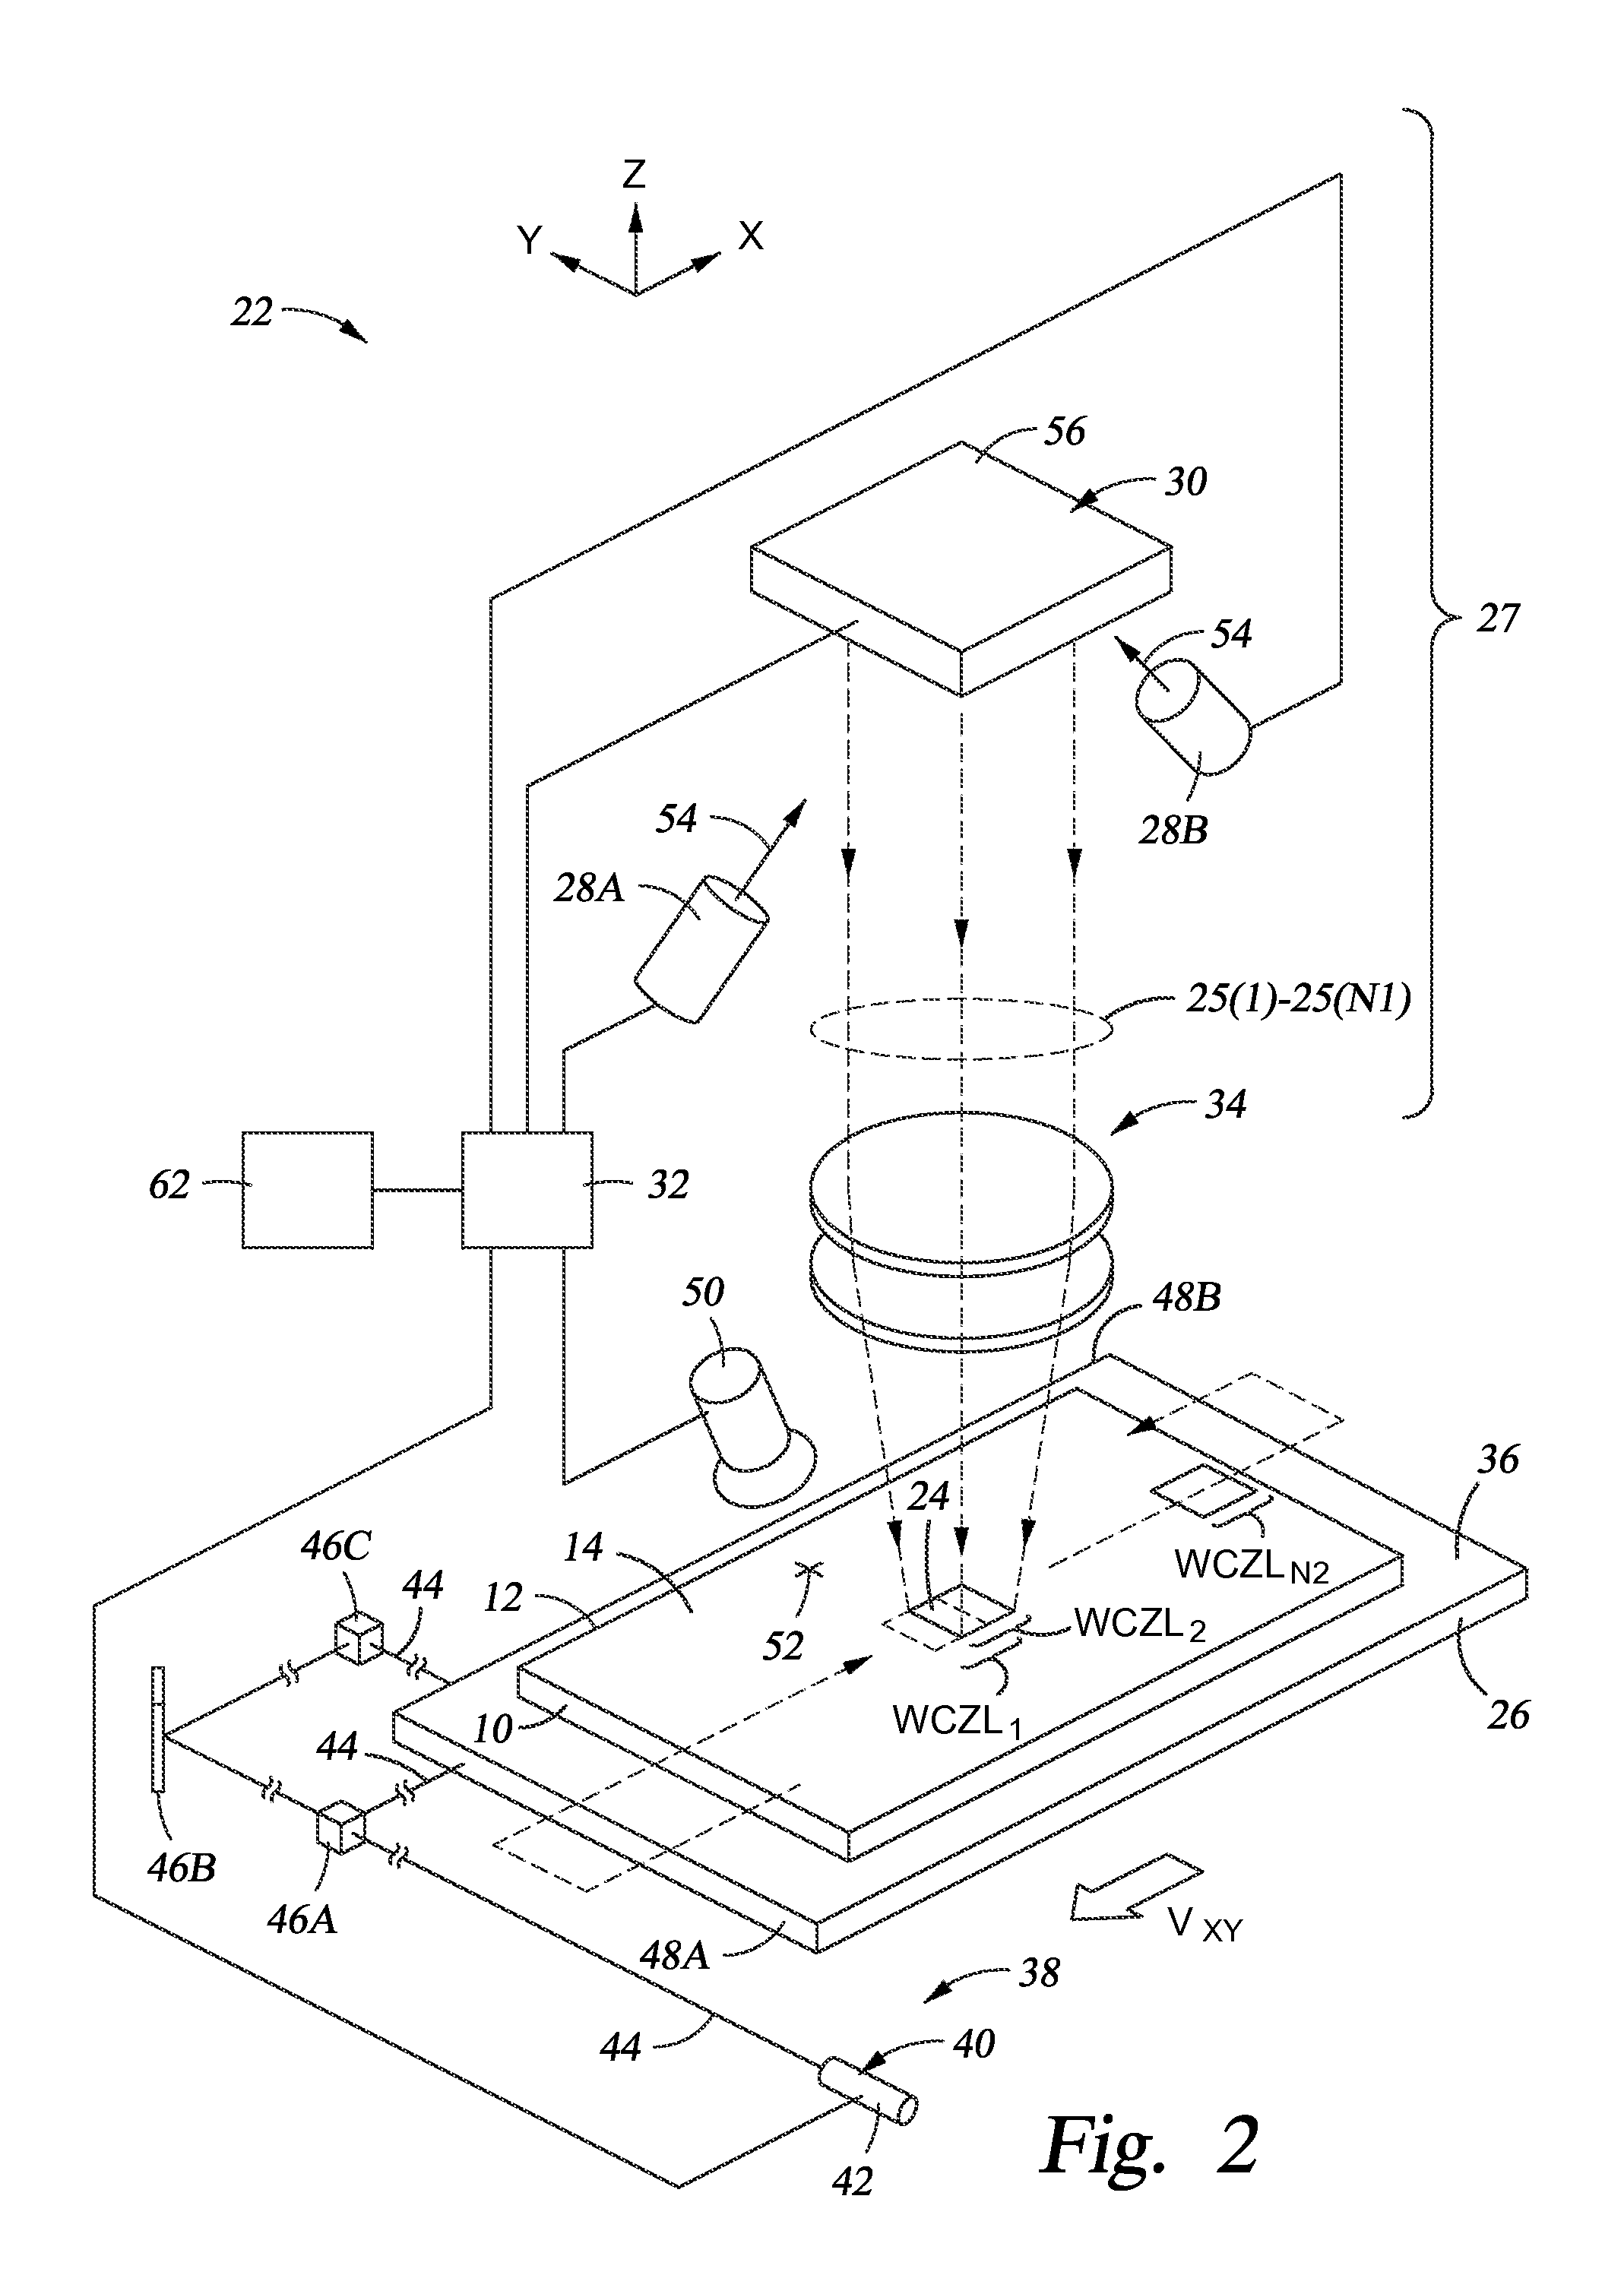 Pattern generators employing processors to vary delivery dose of writing beams according to photoresist thickness, and associated methods